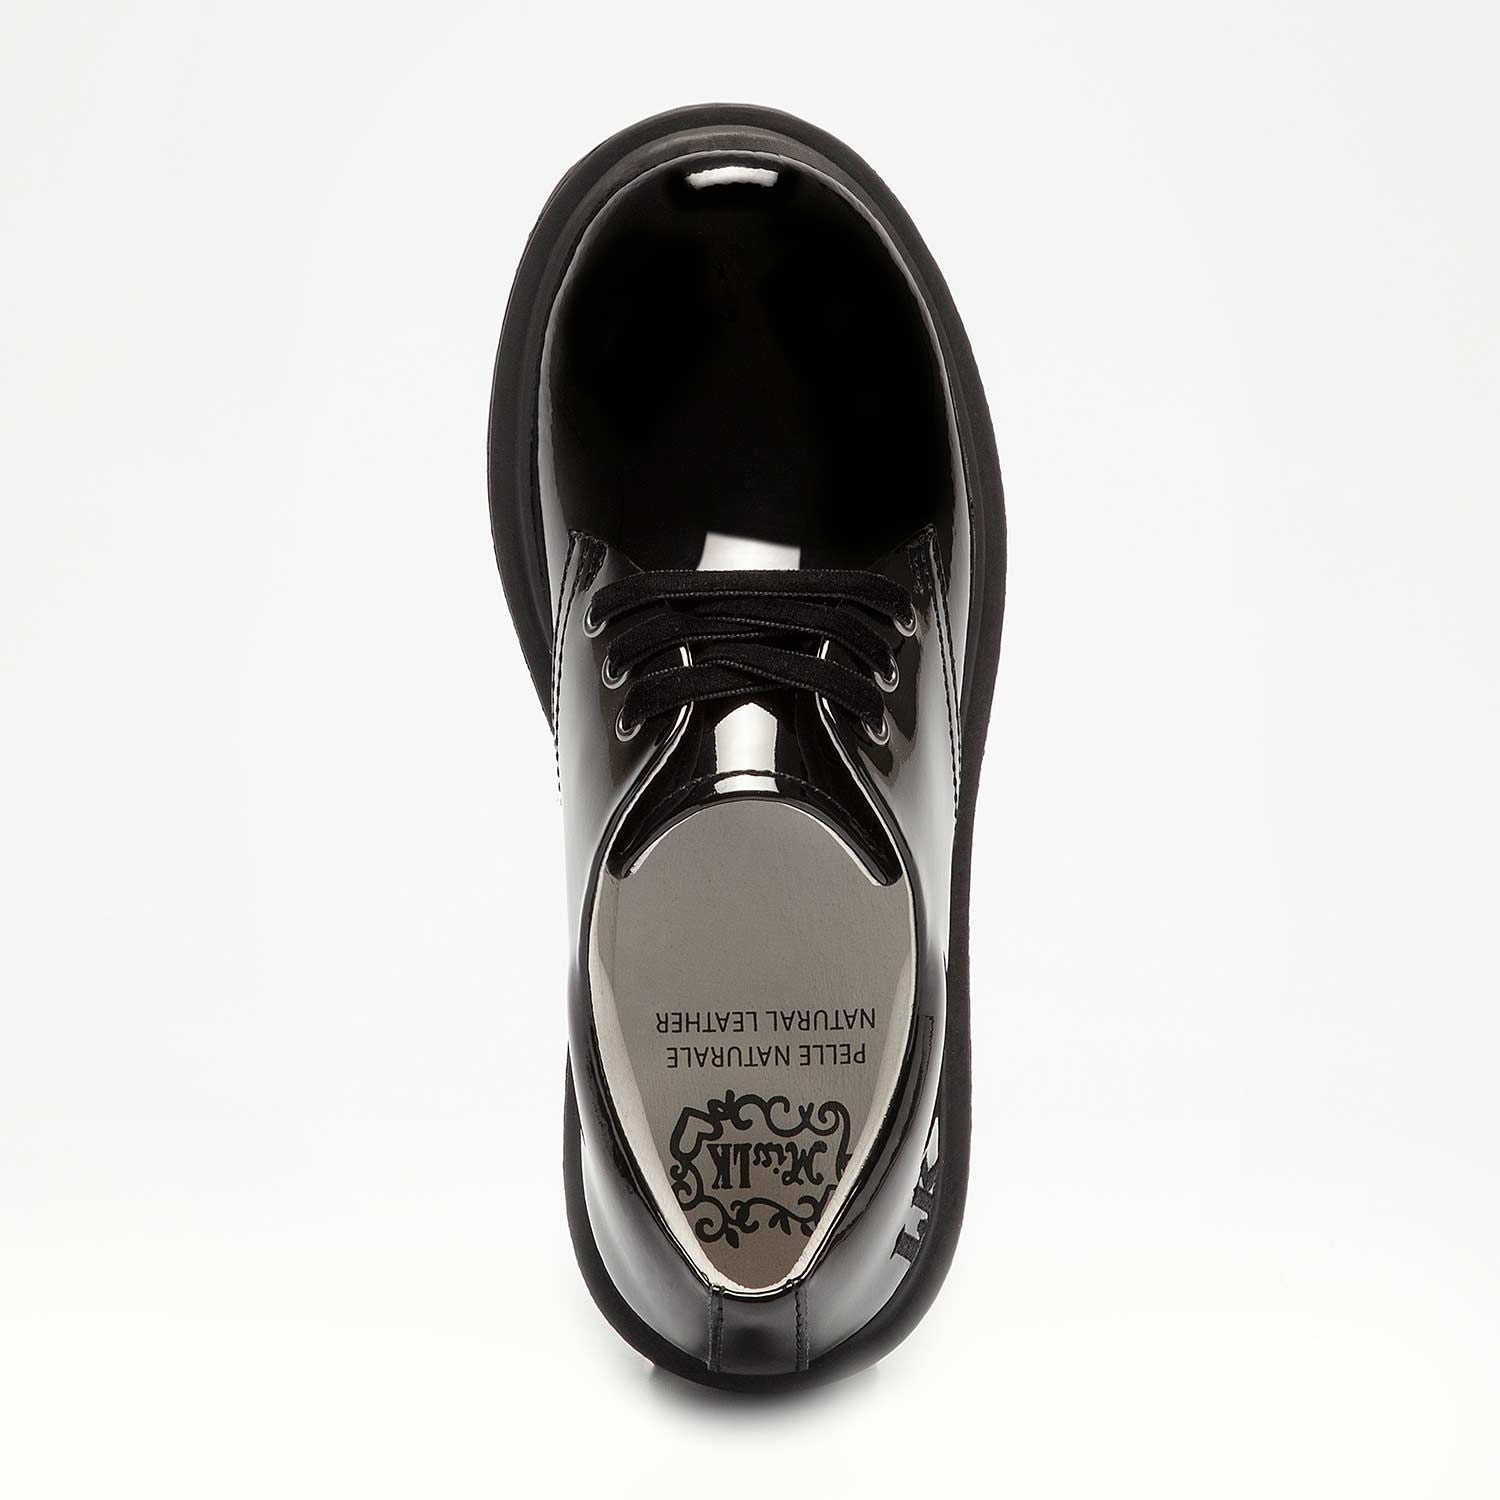 A girls school shoe by Lelli Kelly, style Elaine, in black patent with lace fastening. Above view.